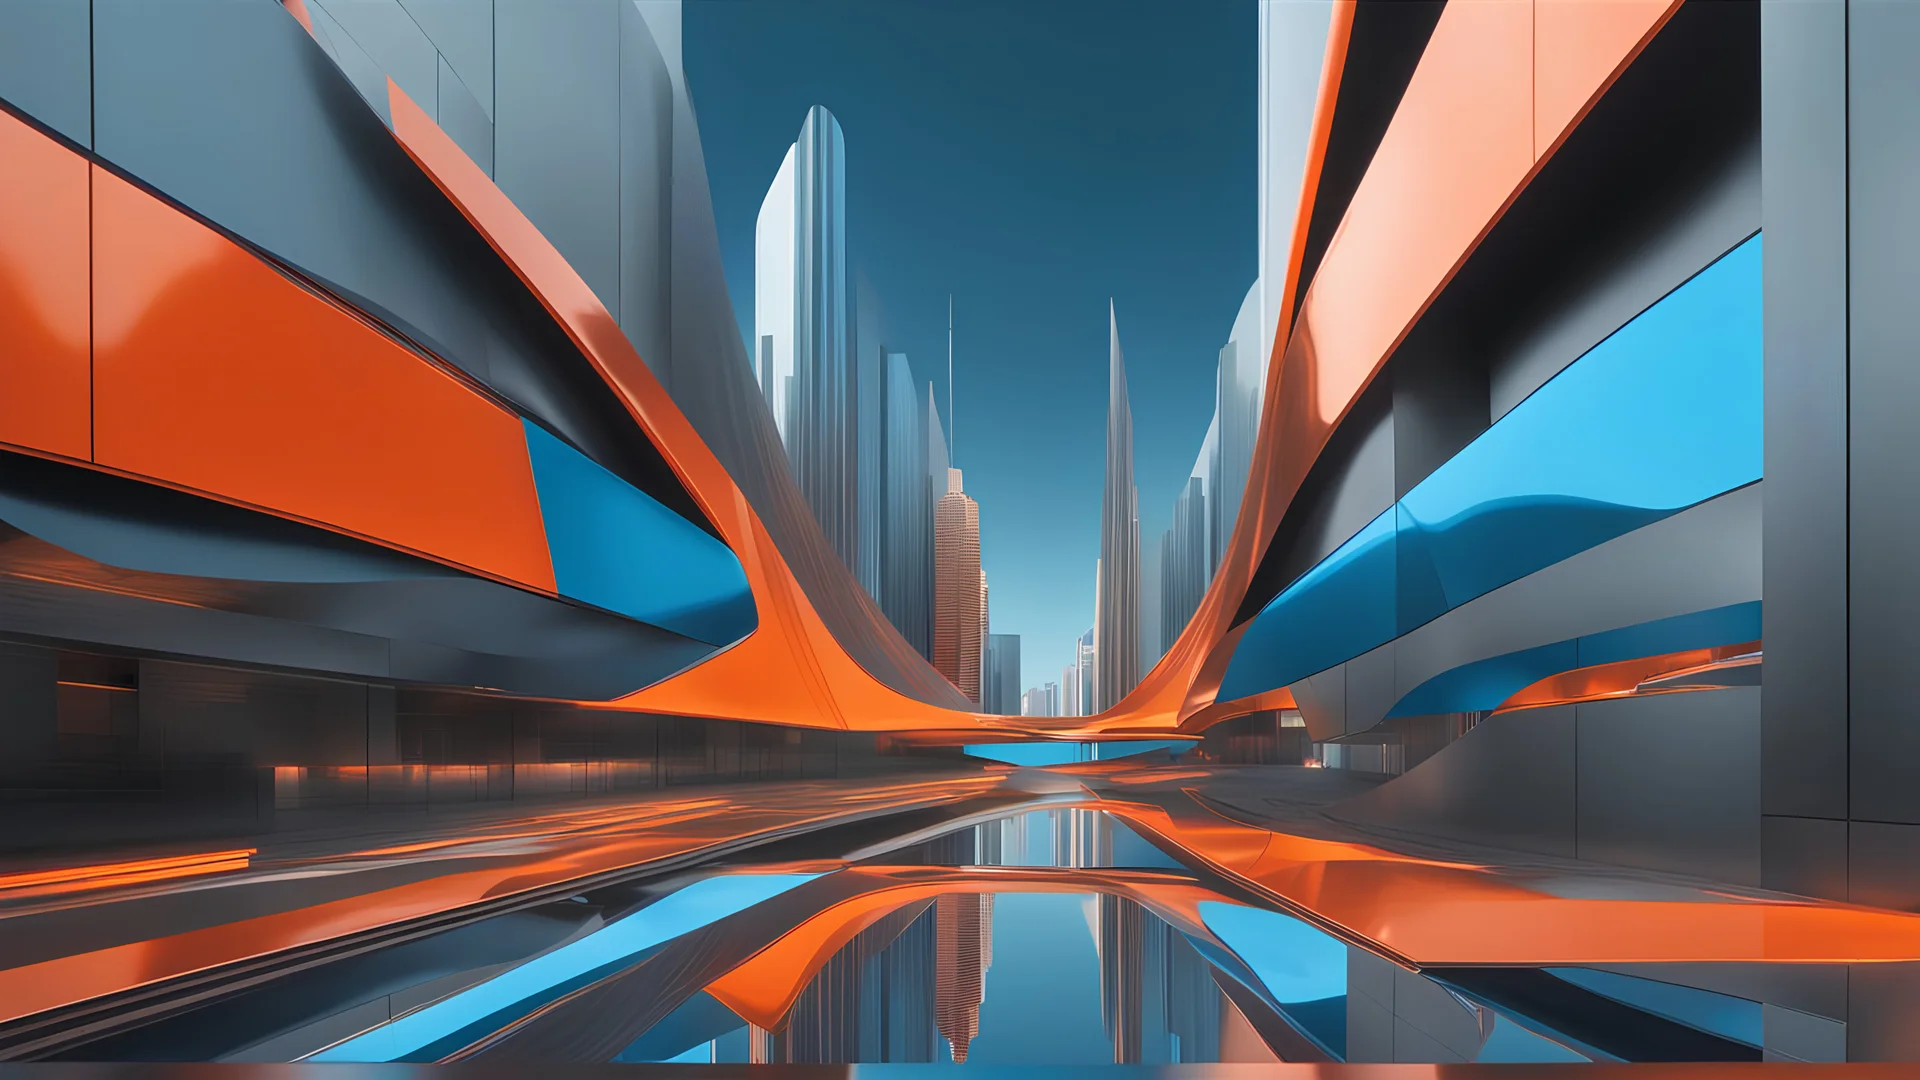 (hustle and bustle:55), (loop kick:20), (deconstruct:28), retro futurism style, urban canyon, drone view, perfect loops, amazing reflections, excellent translucency, hard edge, colors of metallic orange and metallic steel blue